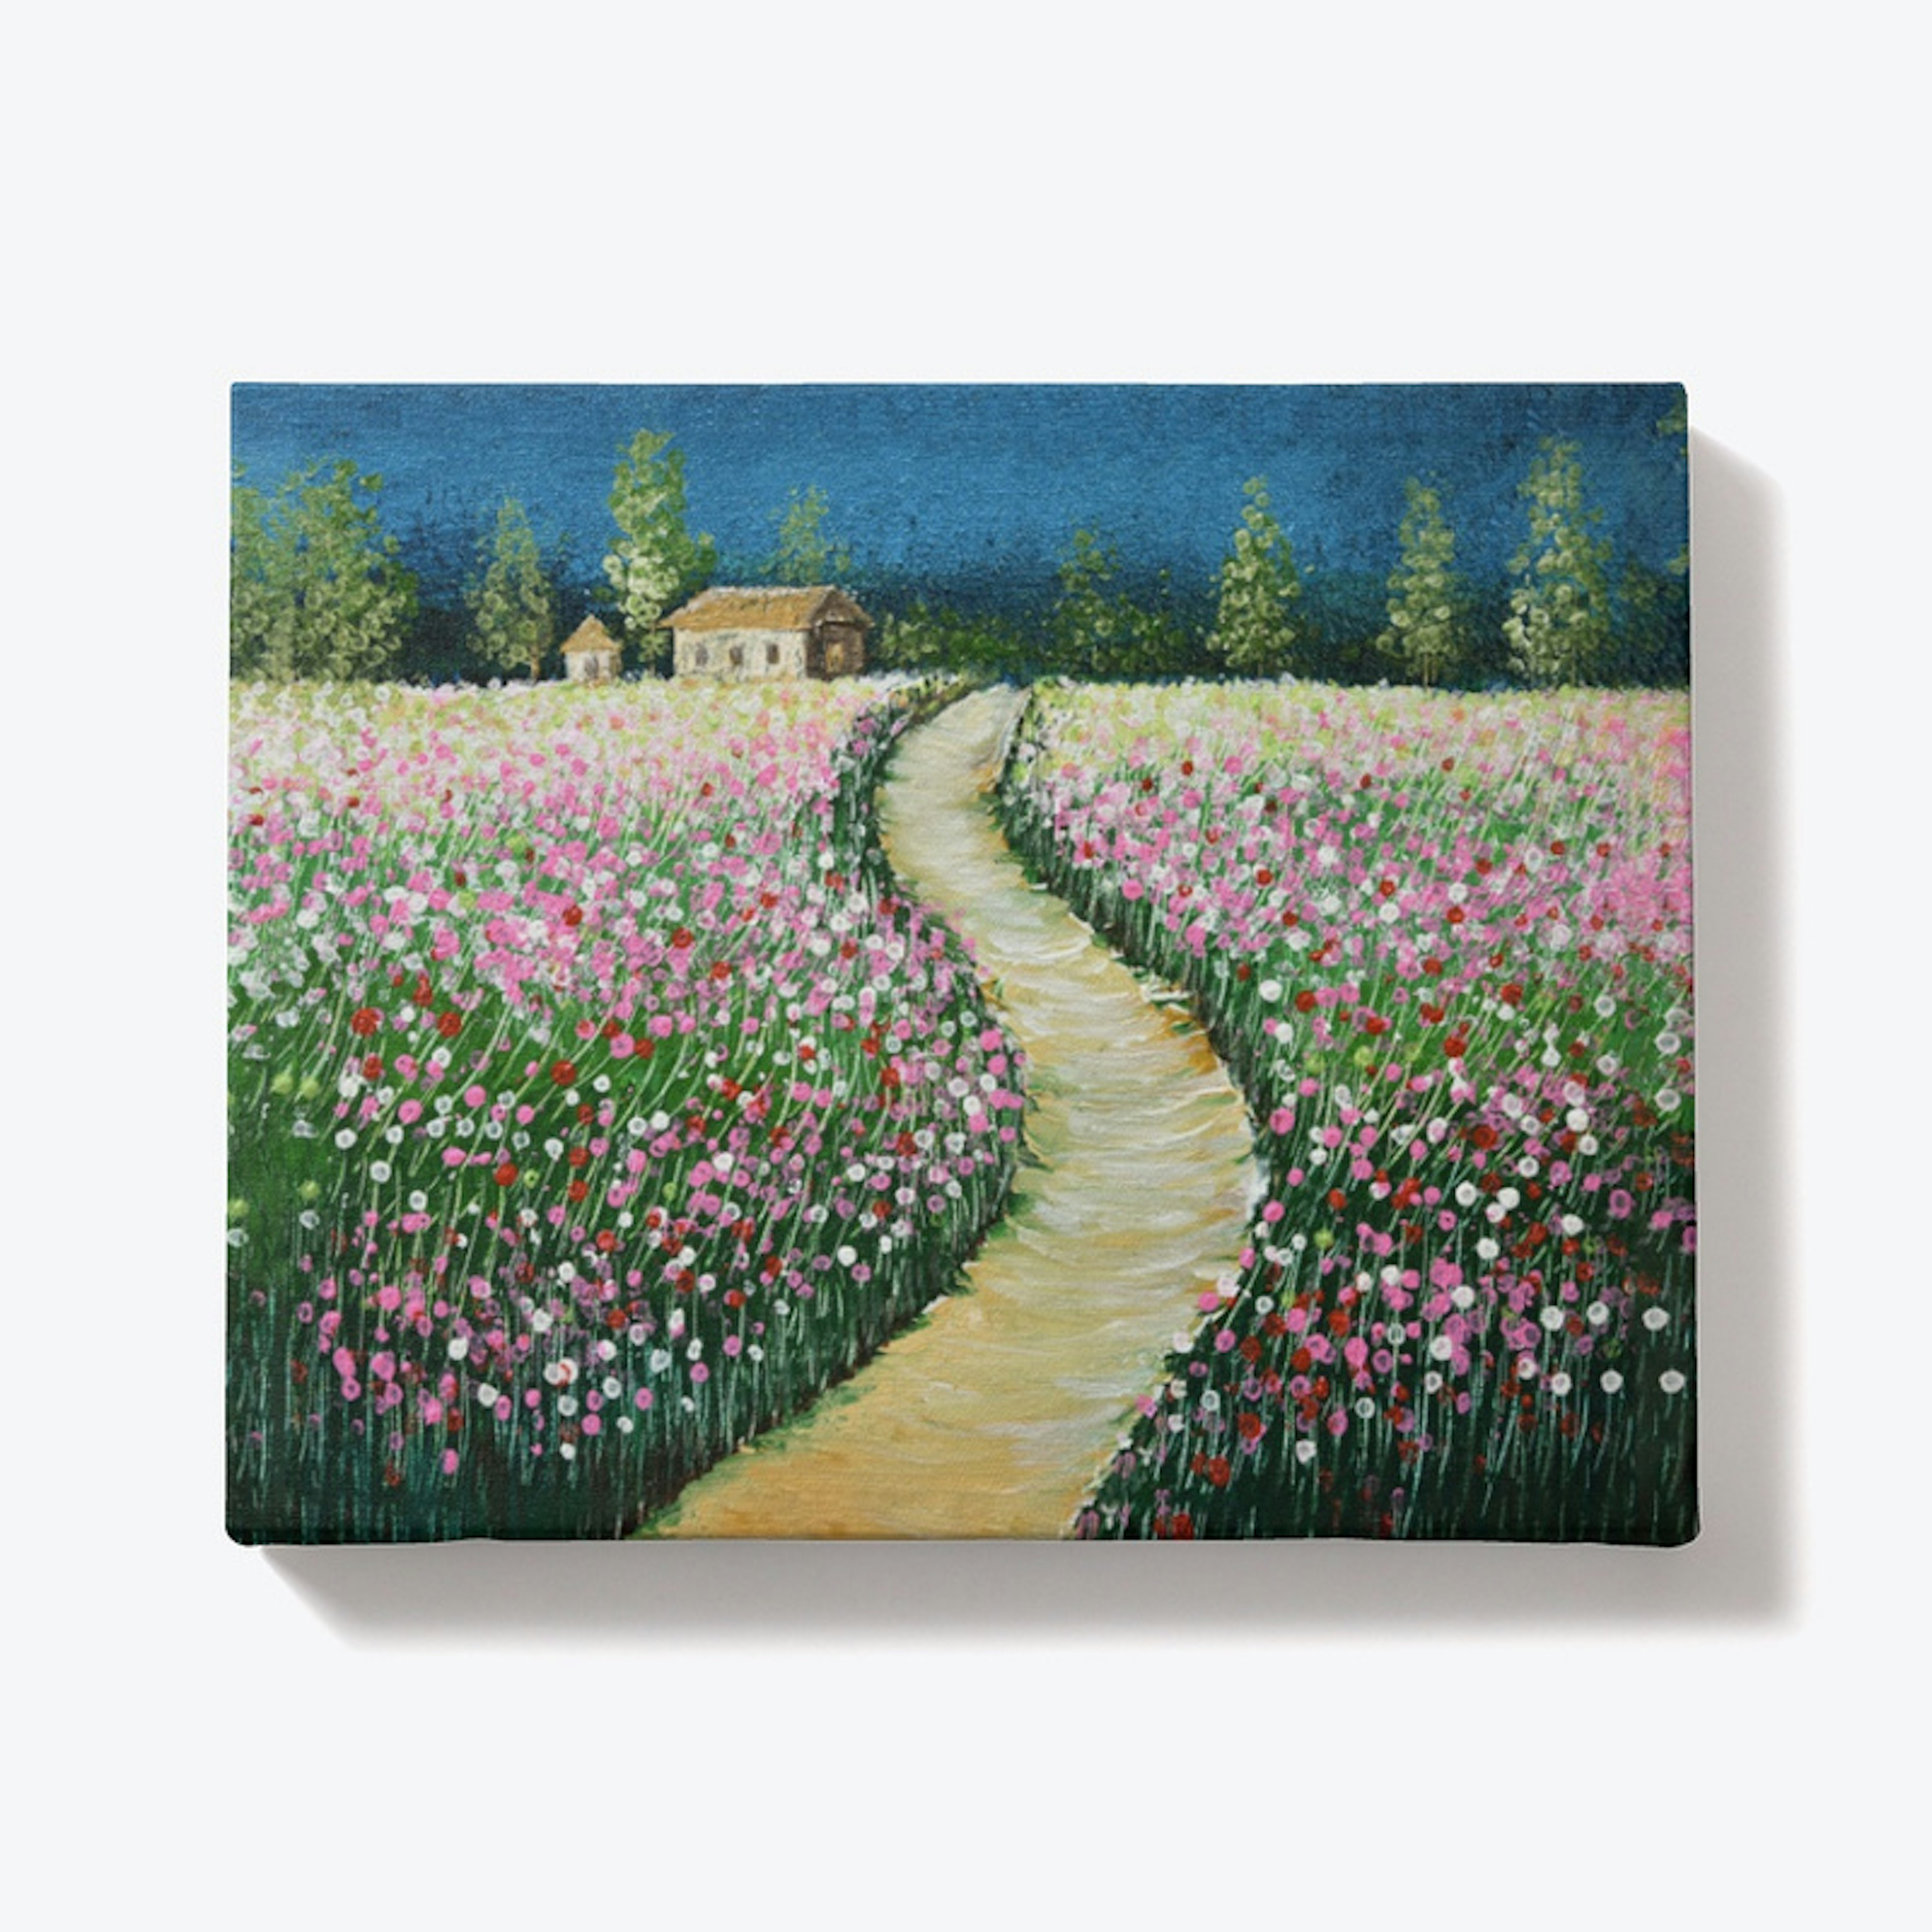 A Country Road with Cosmos in bloom